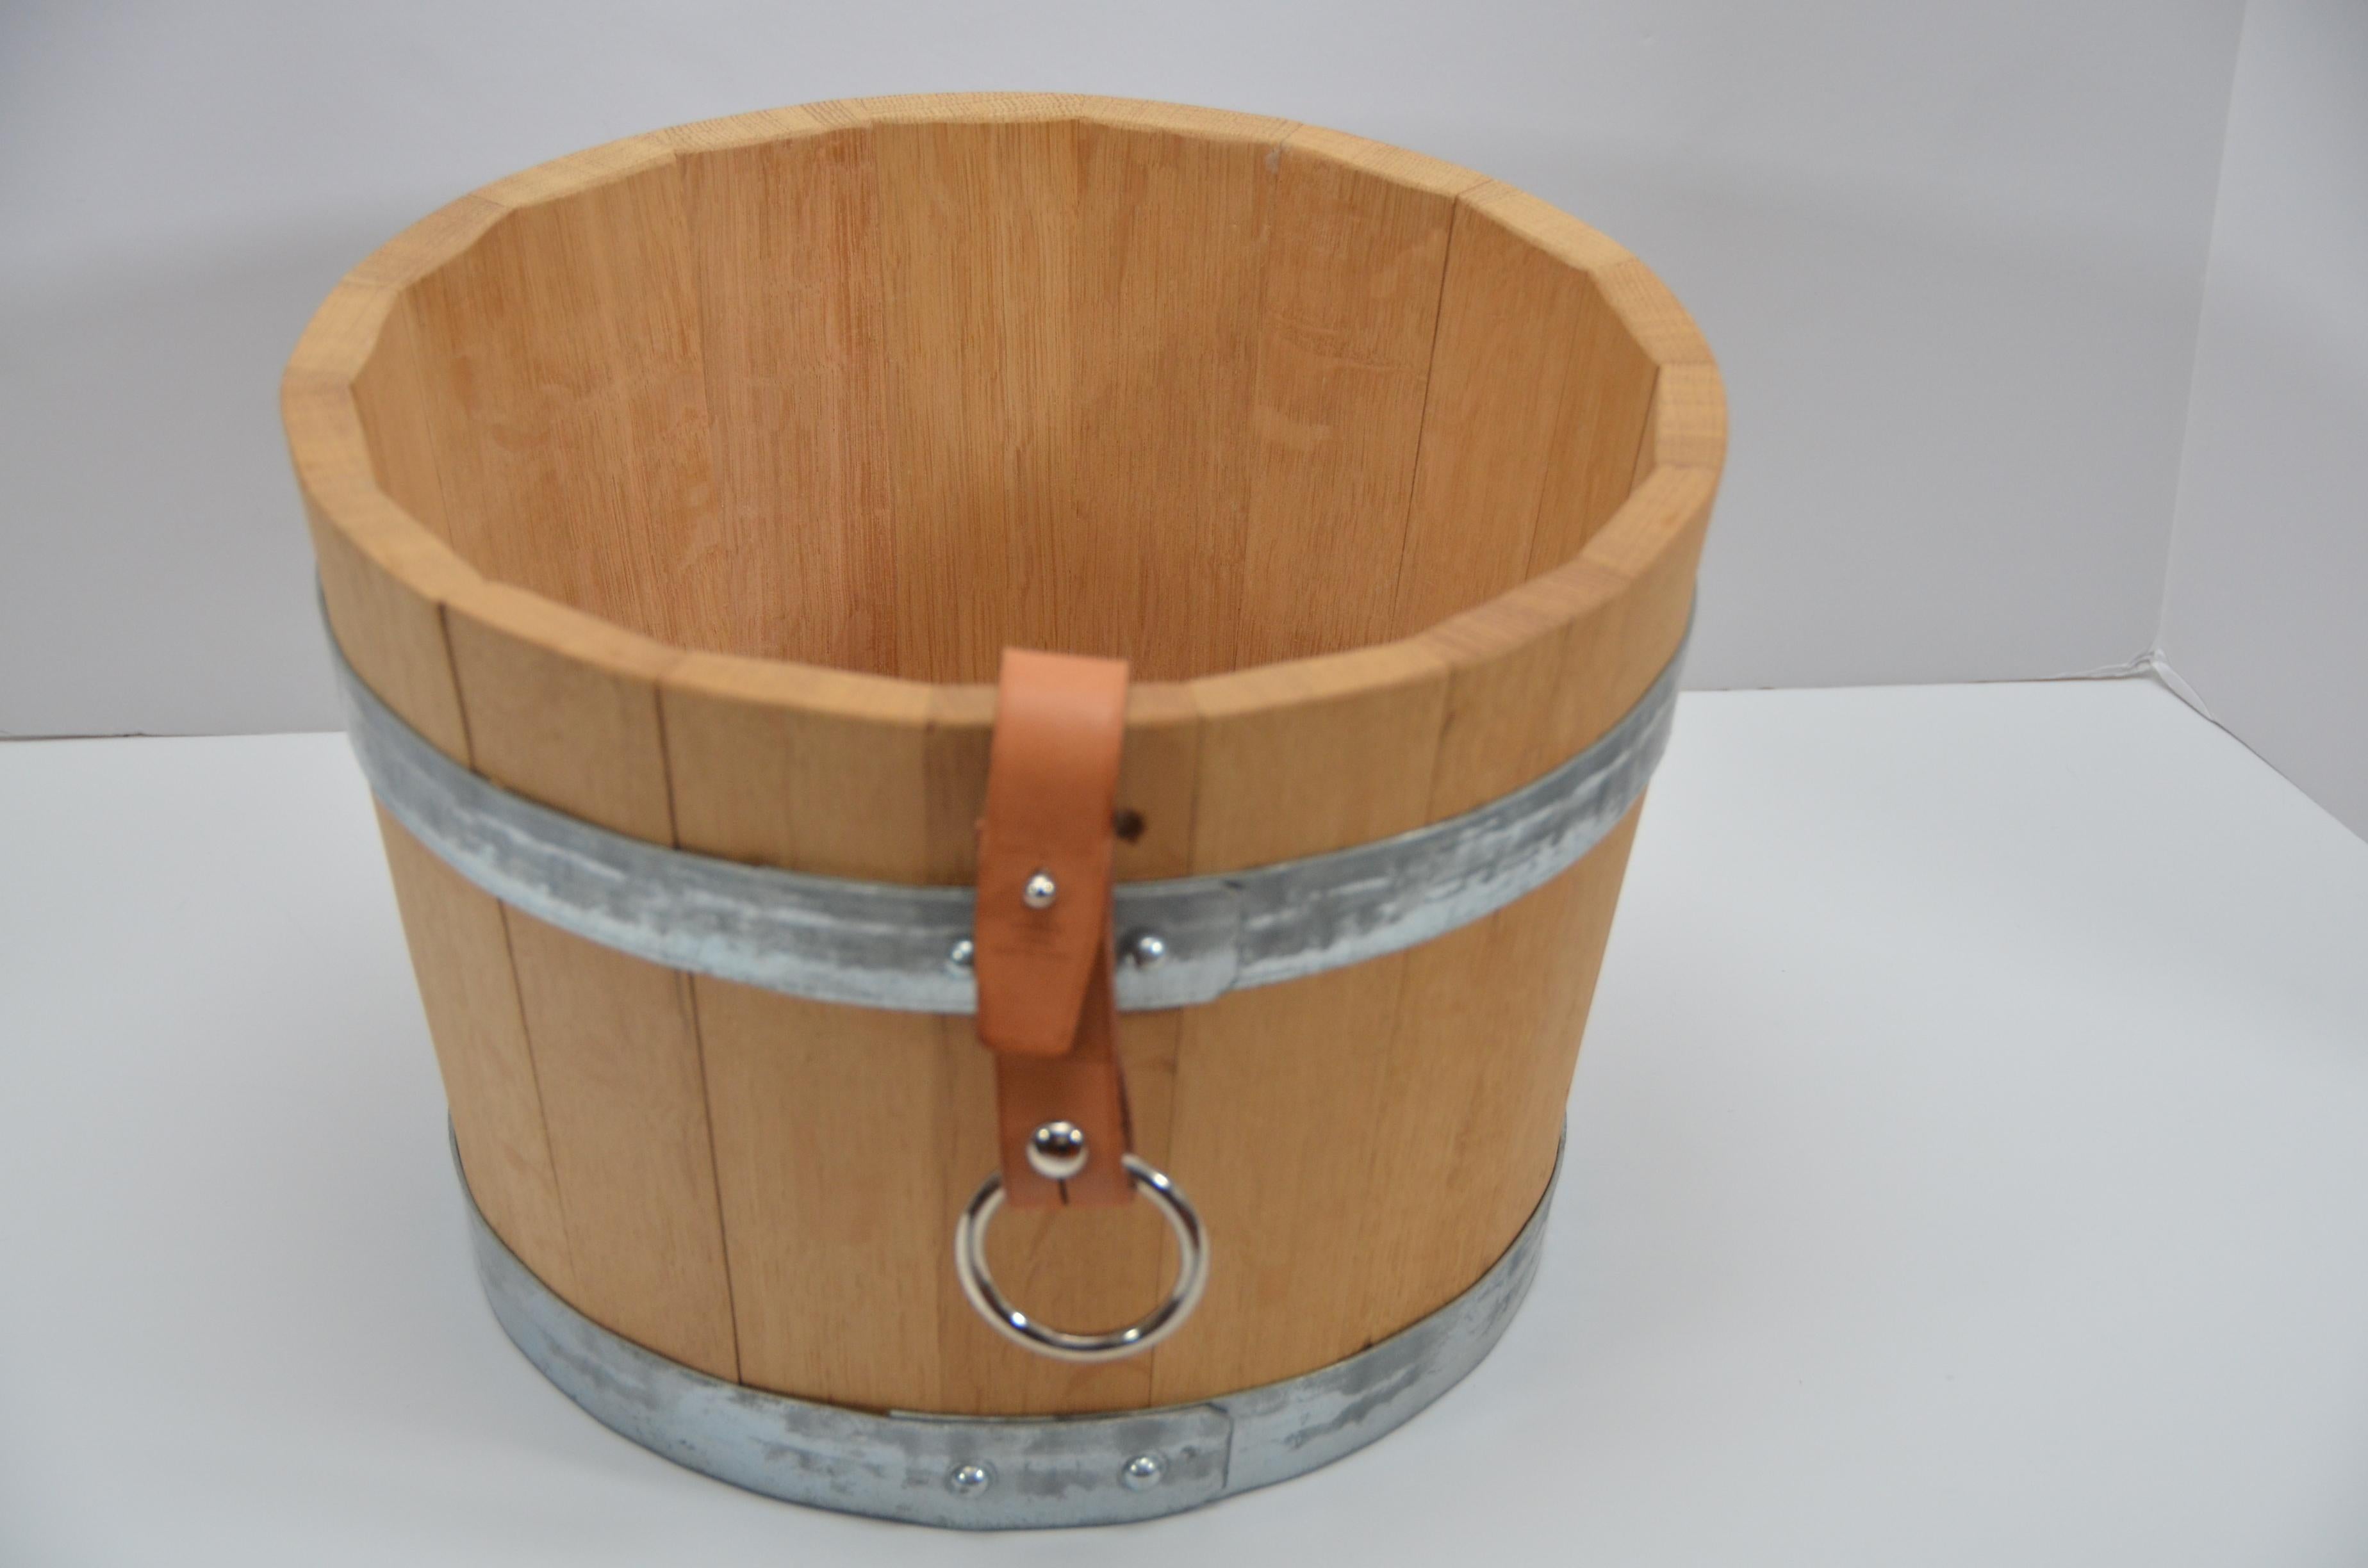 100% Guaranteed authentic Hermes equestrian grooming stable bucket features oak wood. 
Cowhide handle with stainless steel ring.  Hermes Sellier Paris signature in black. 
This equestrian piece is also a wonderful display piece in the home! 
No